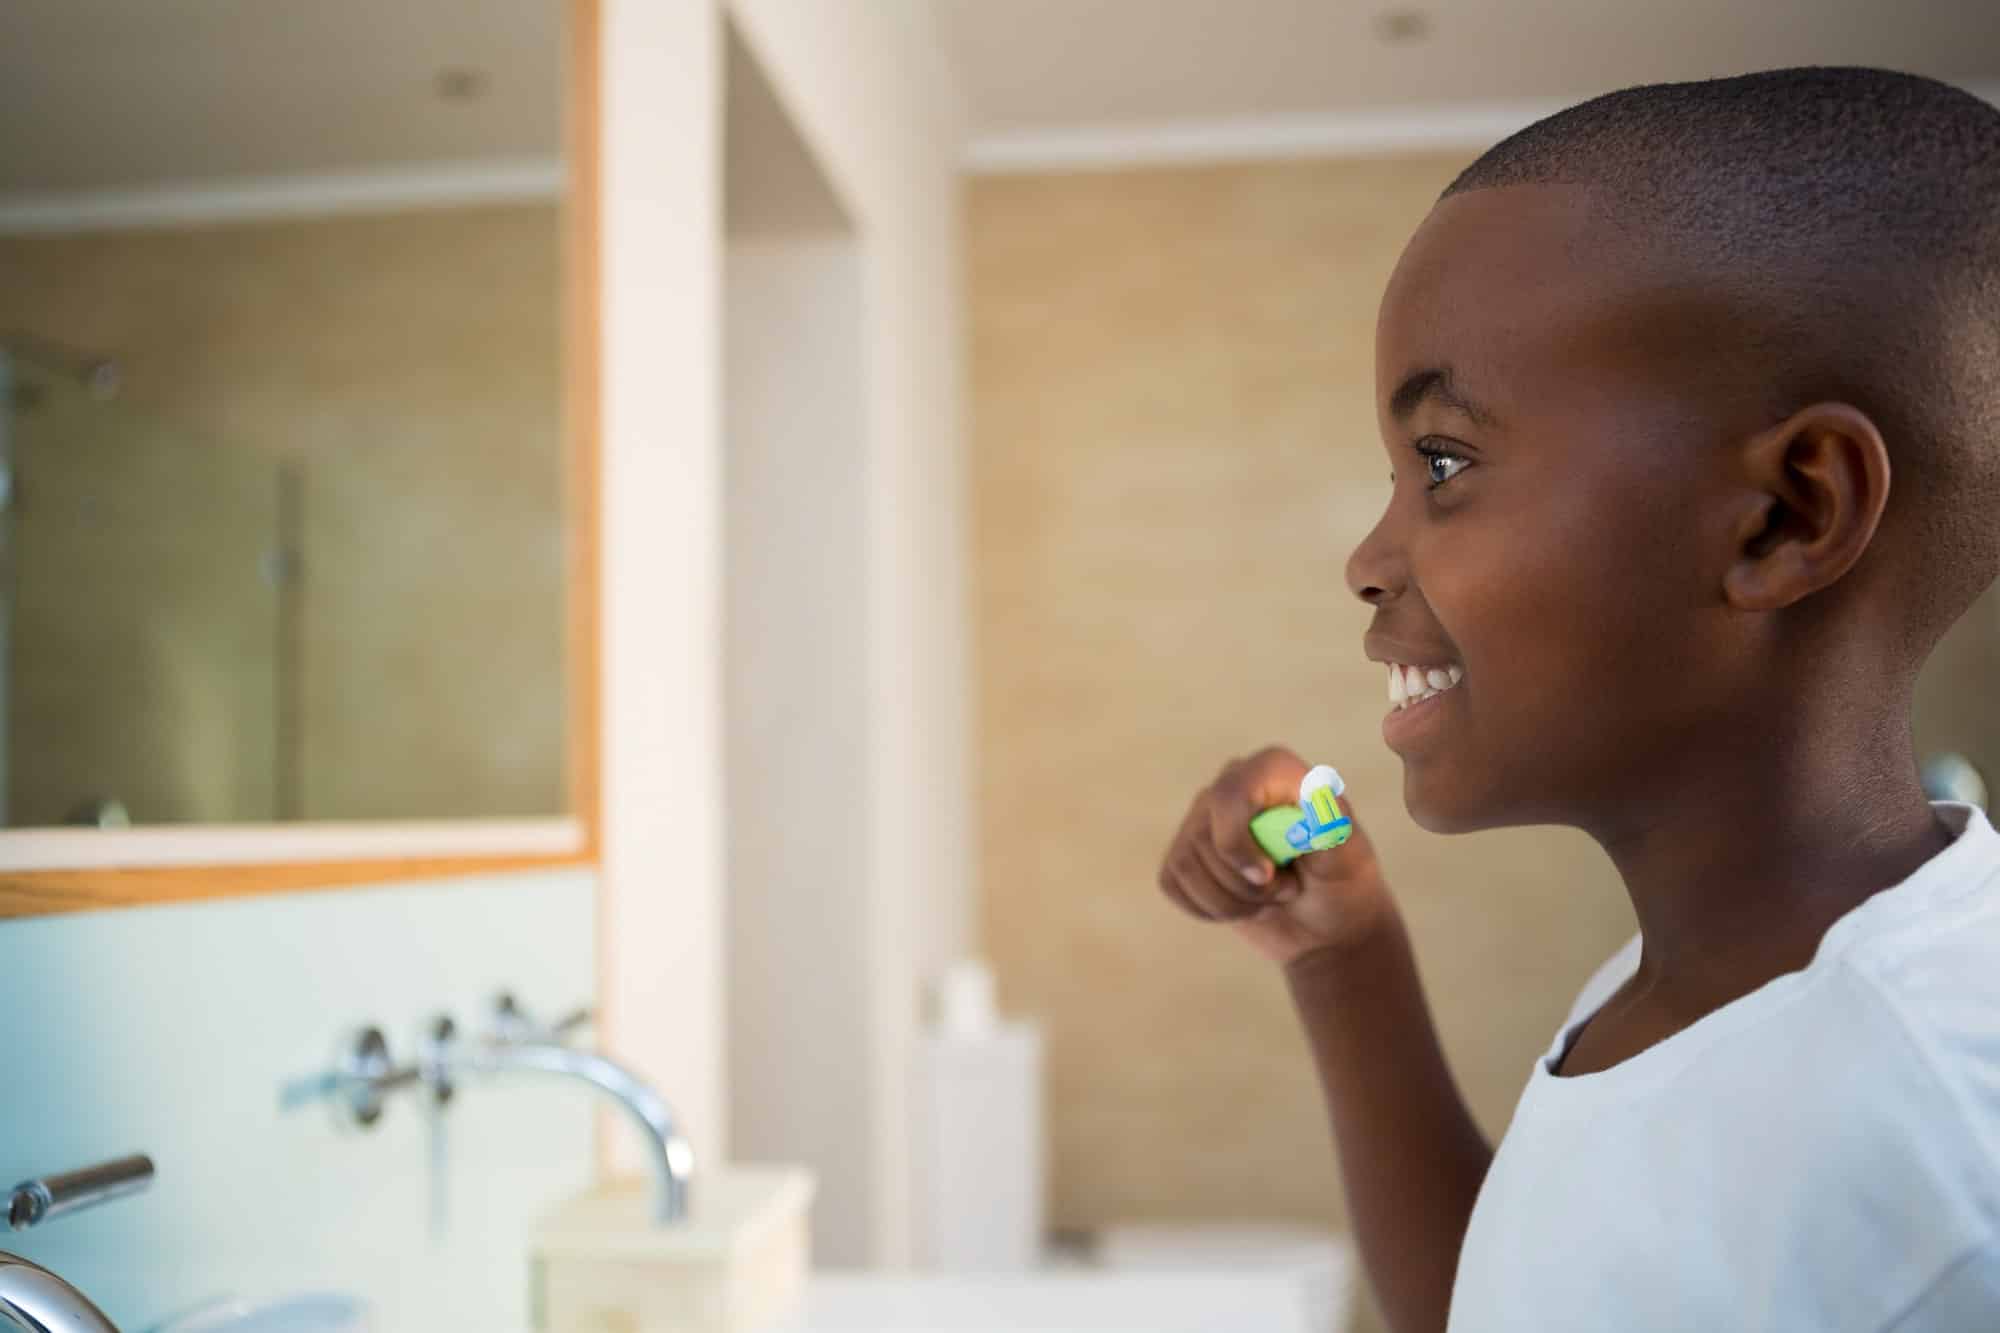 Side view of smiling boy with toothbrush